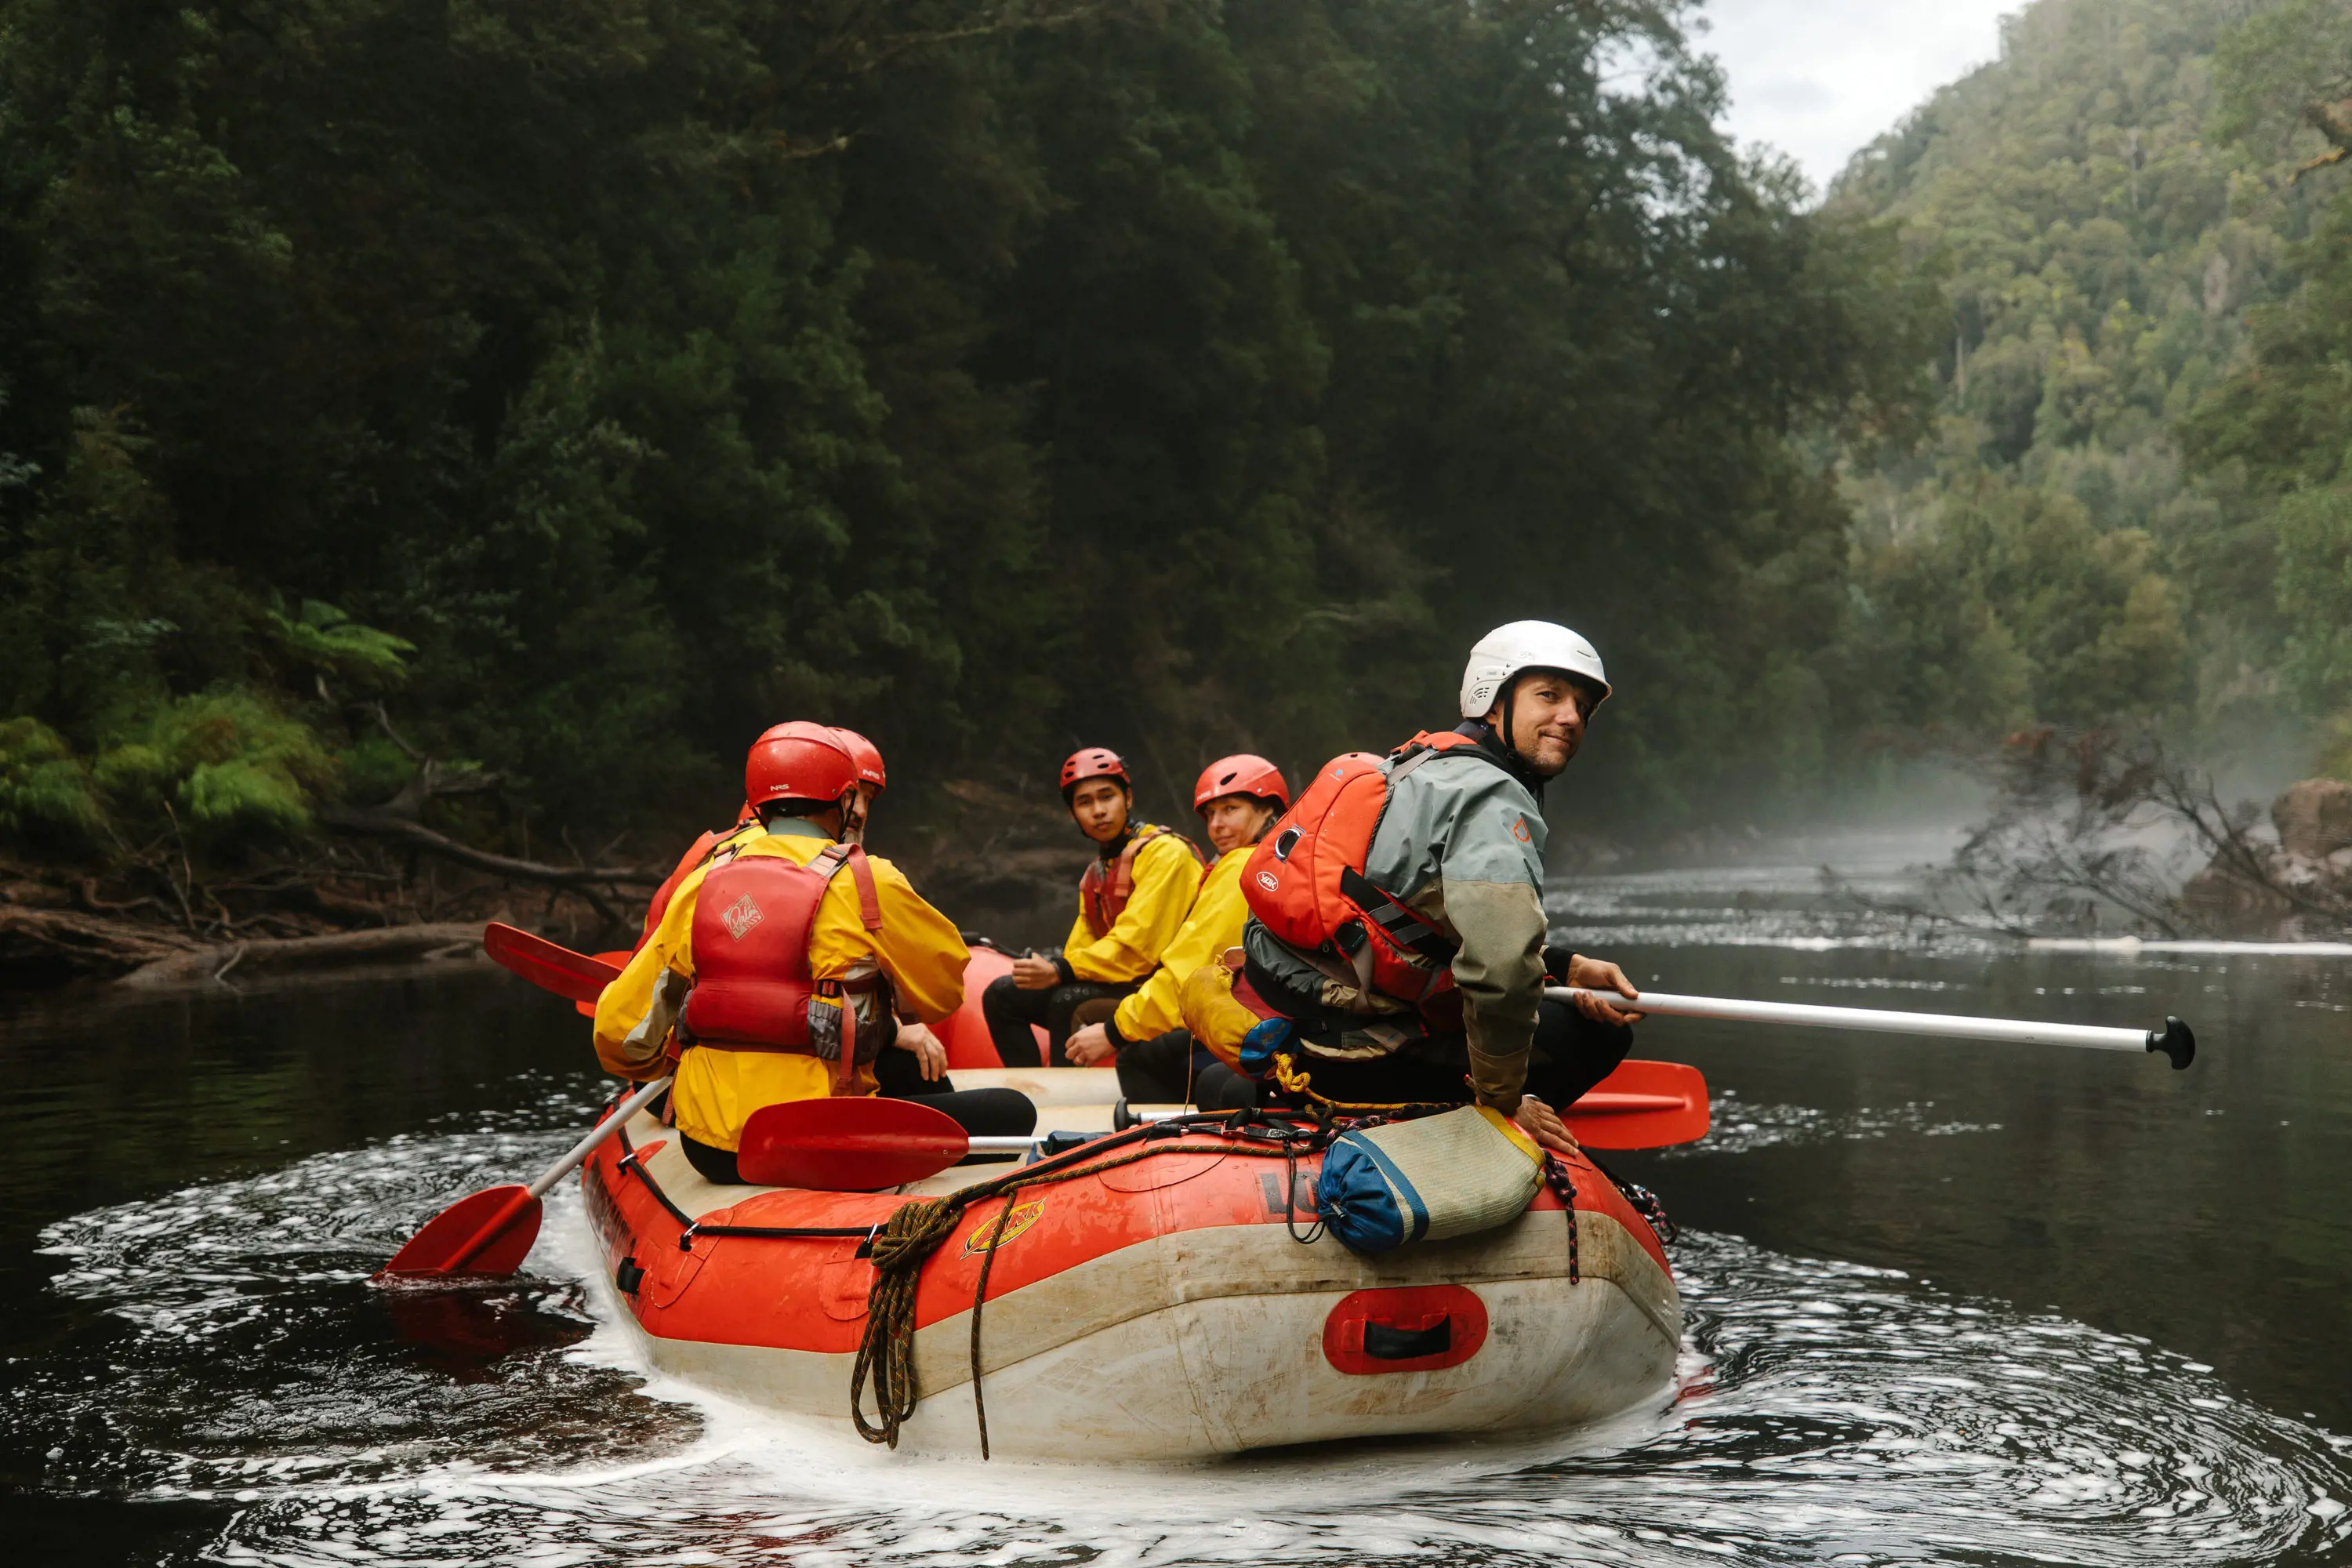 A group wearing life jackets and safety helmets sit in a large raft and paddle along calm waters in a river, passing through dense forest.